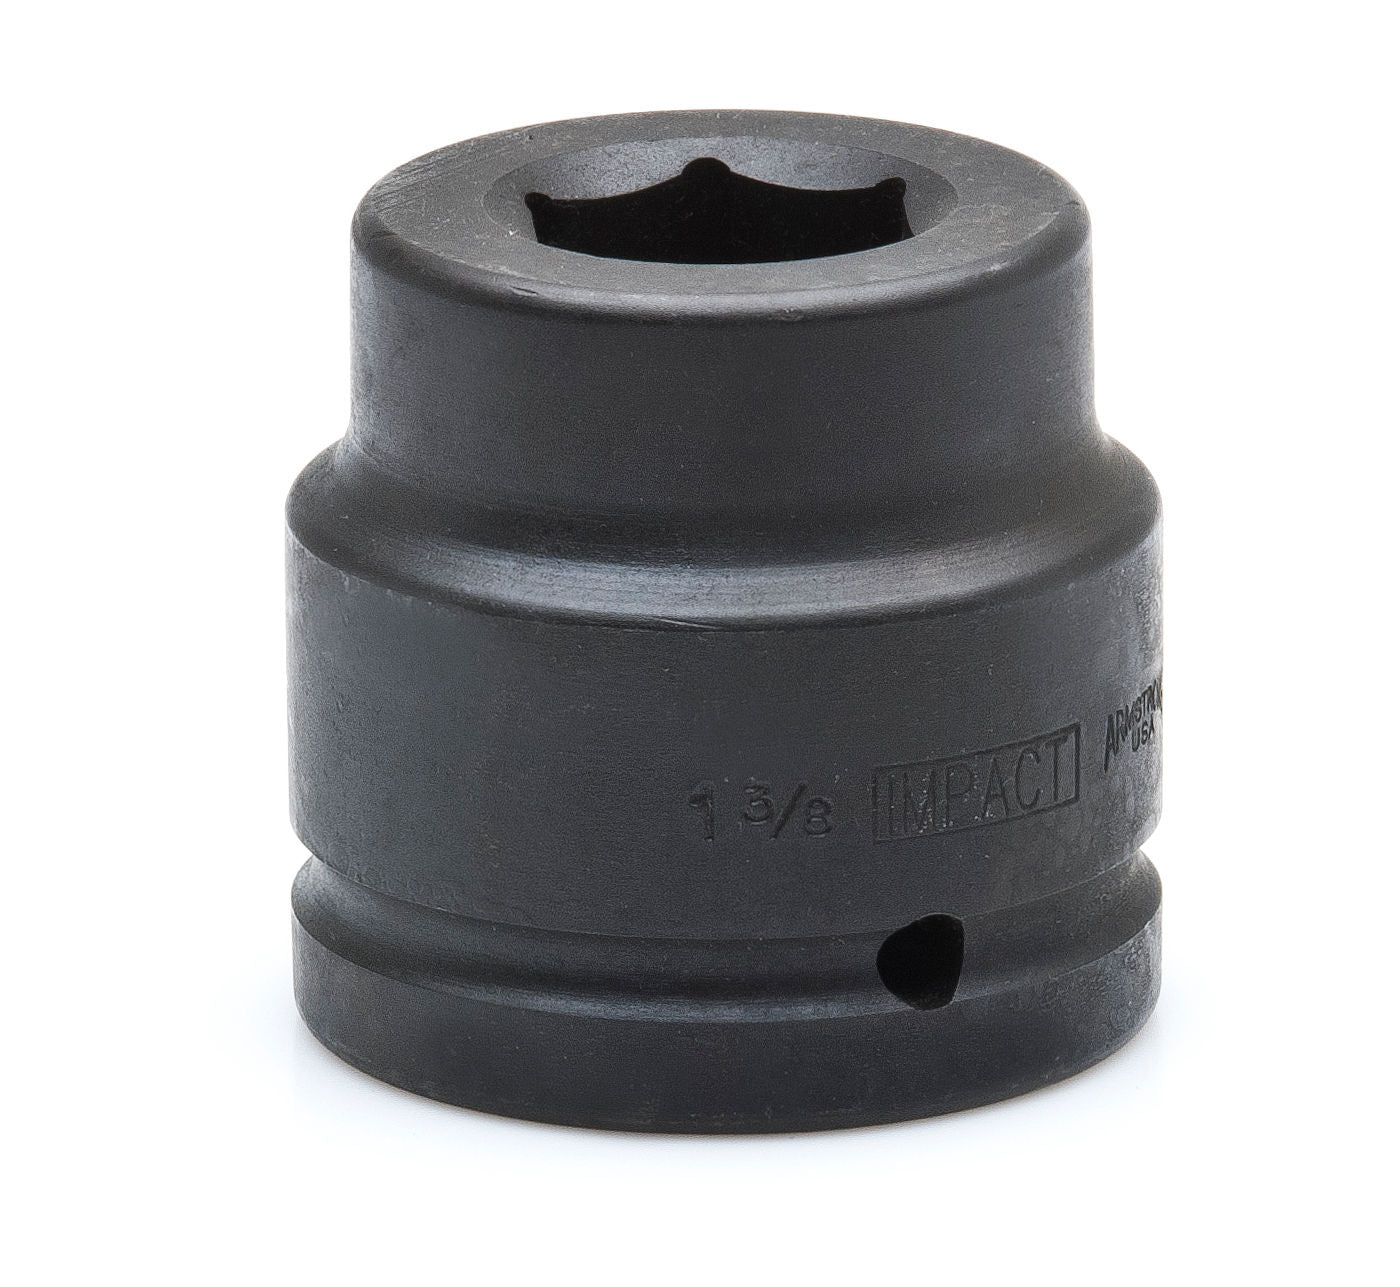 Armstrong 23-044 1-1/2" Drive 6 Point Impact Socket 1-3/8"